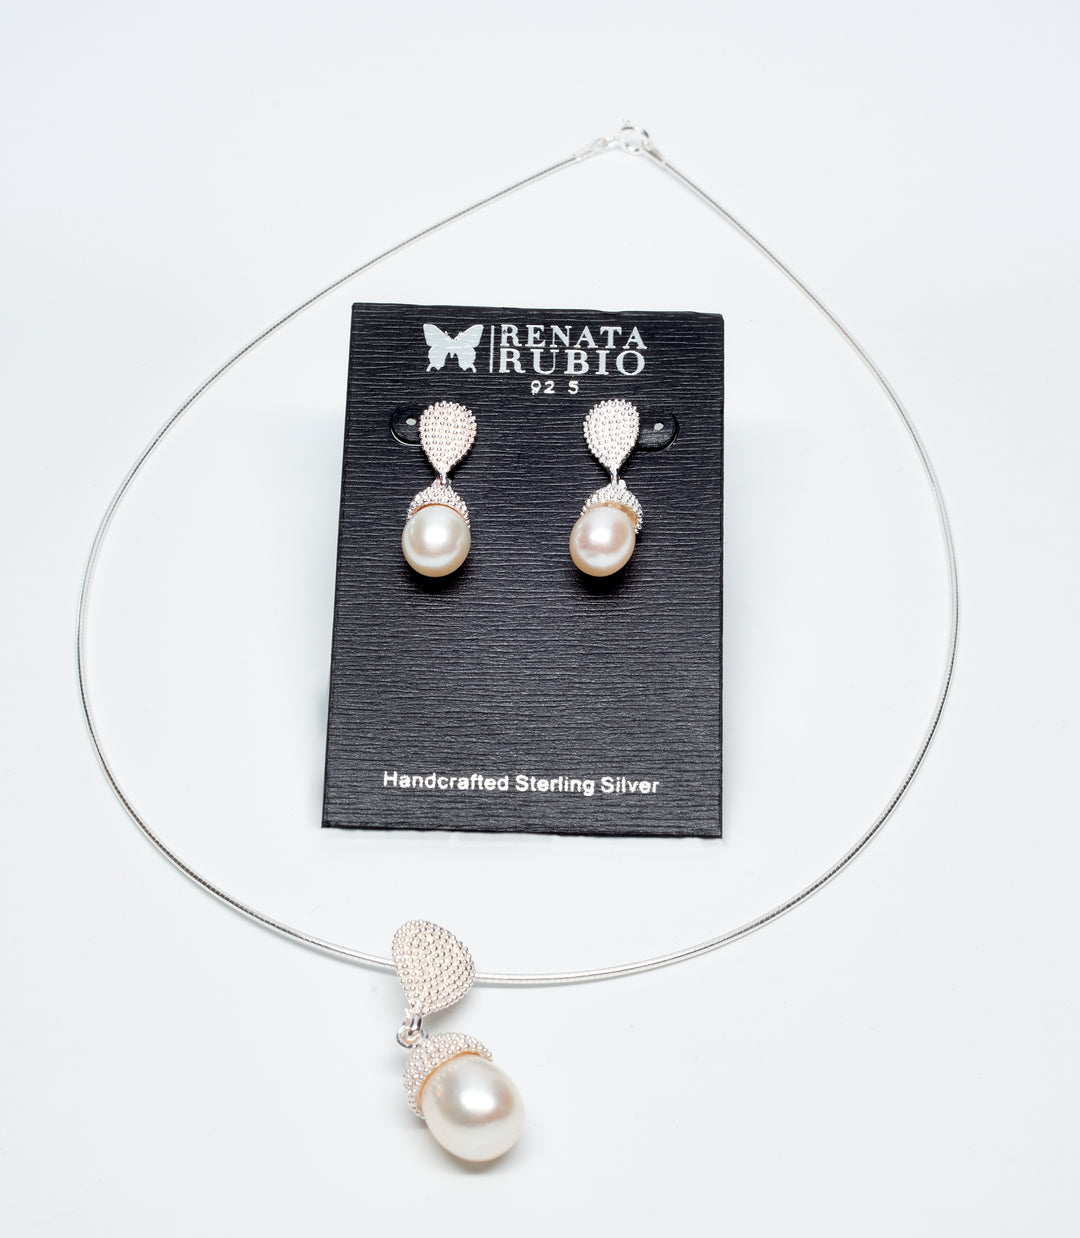 Acorn-Shaped Silver Pearl Earrings and Pendant